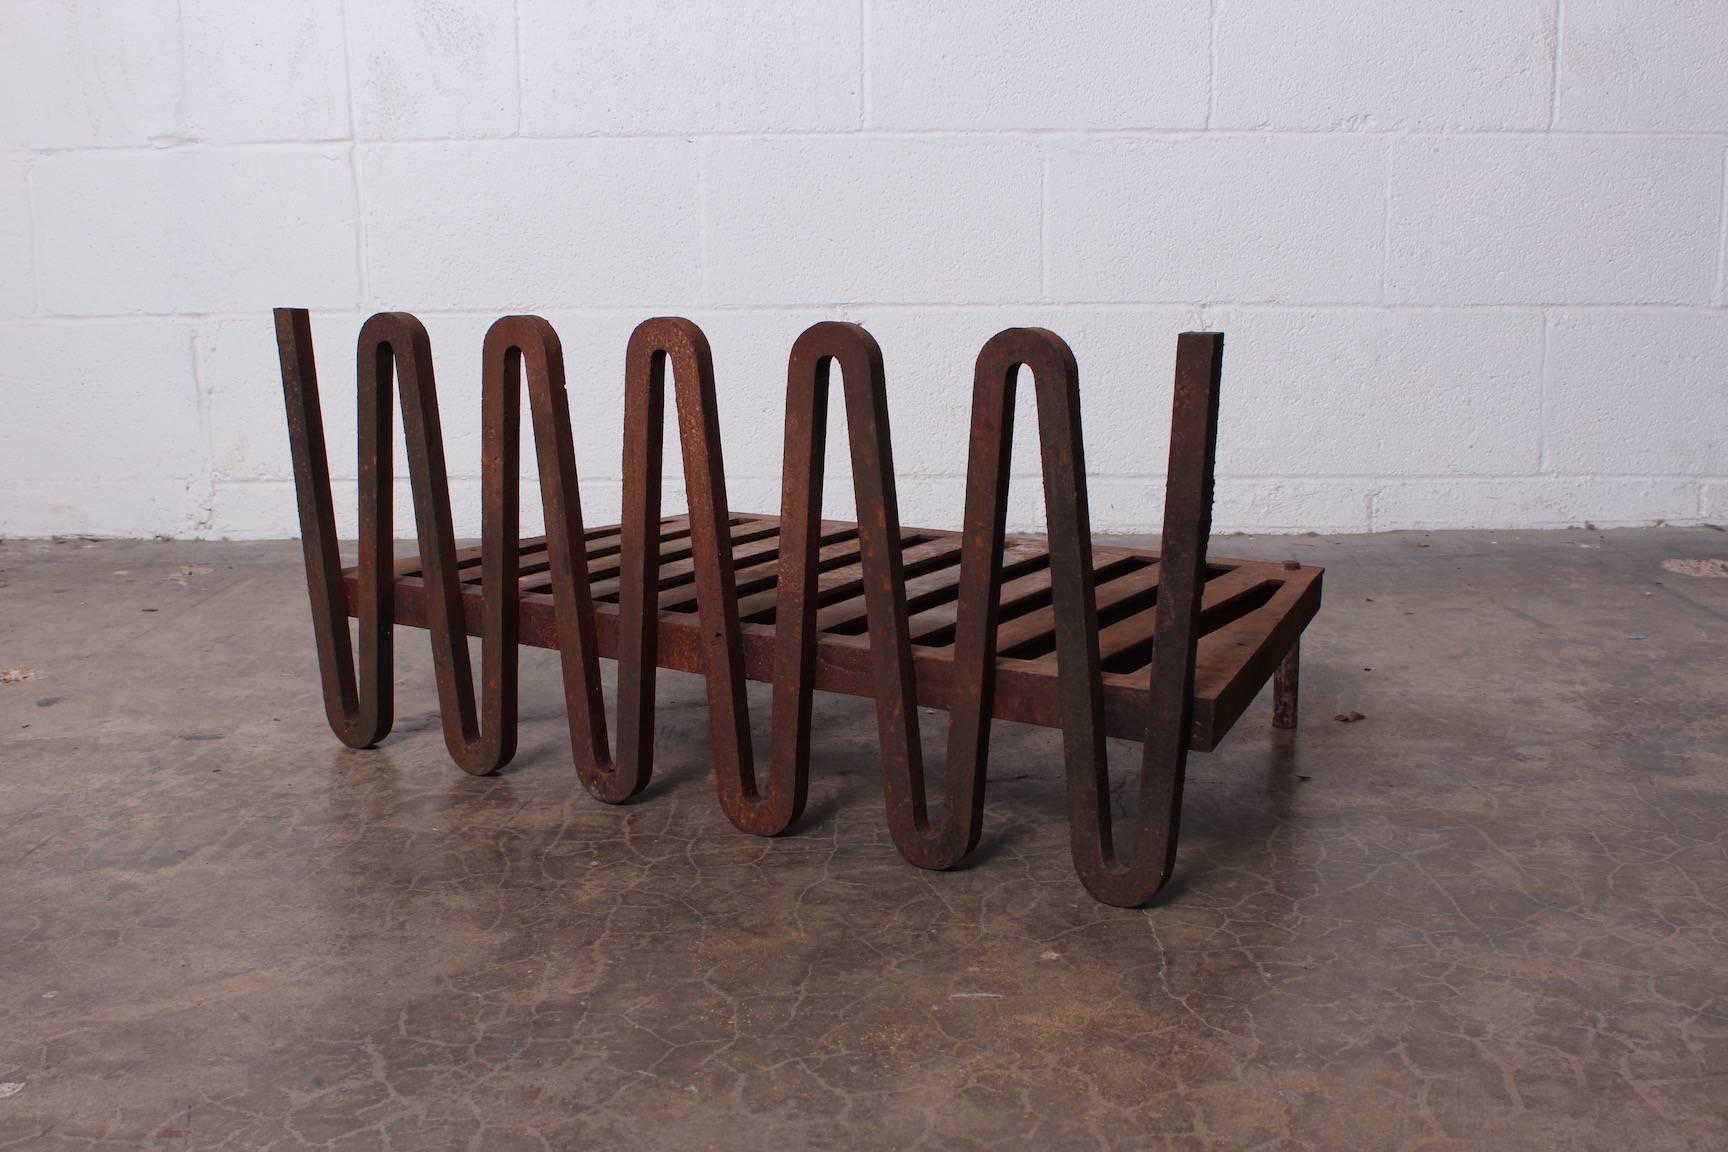 Designed by Mel Bogart for Stewart-Winthrop, this fire grate was selected for the 1955 good design exhibition. Fire tools are available separately.